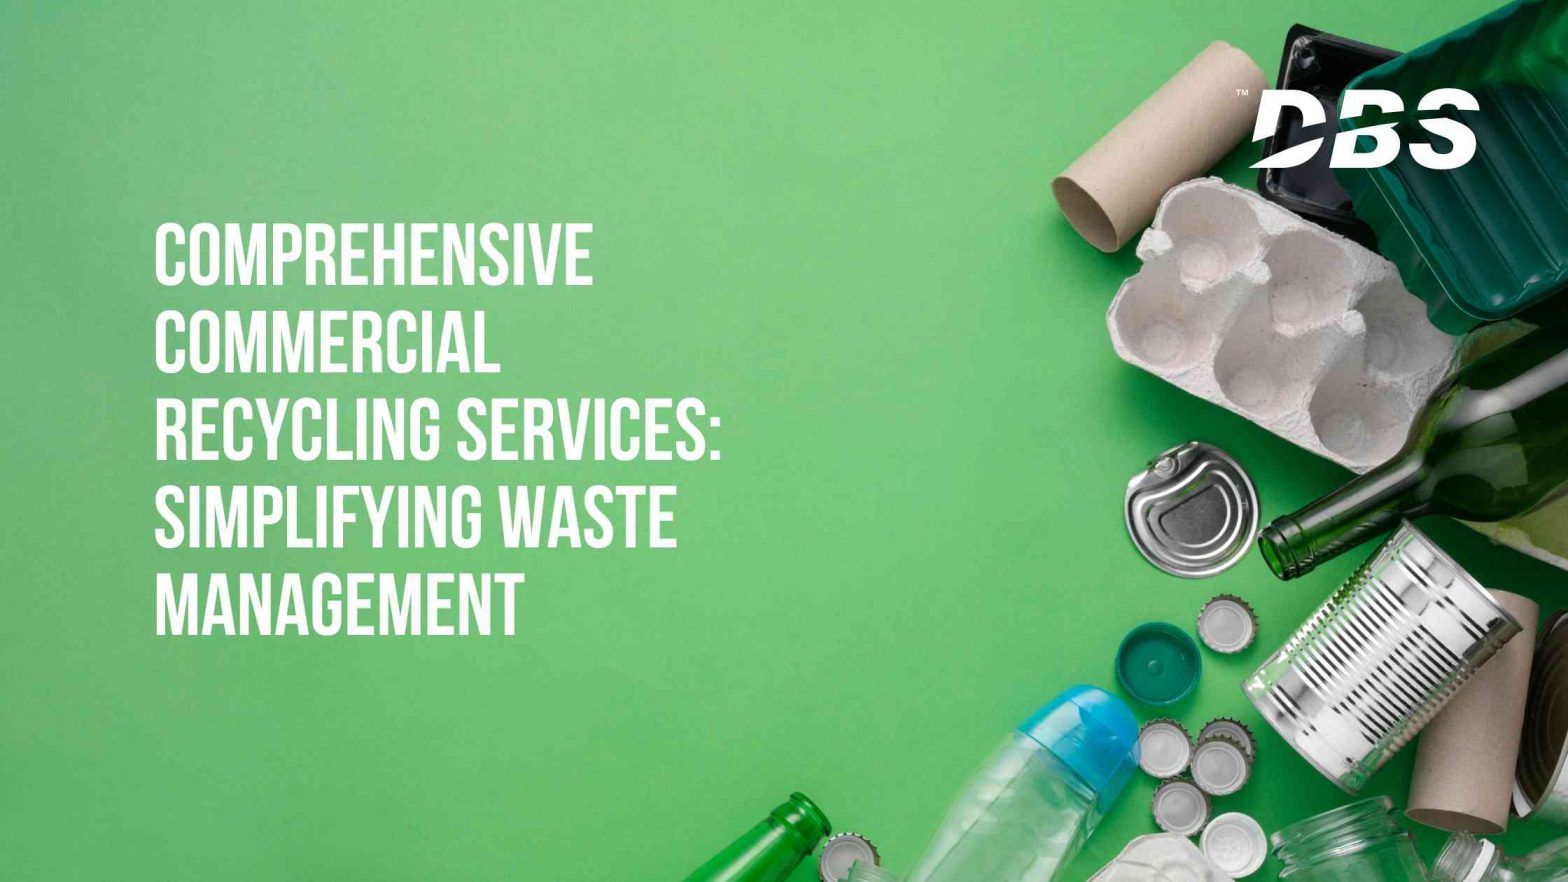 Comprehensive commercial recycling services